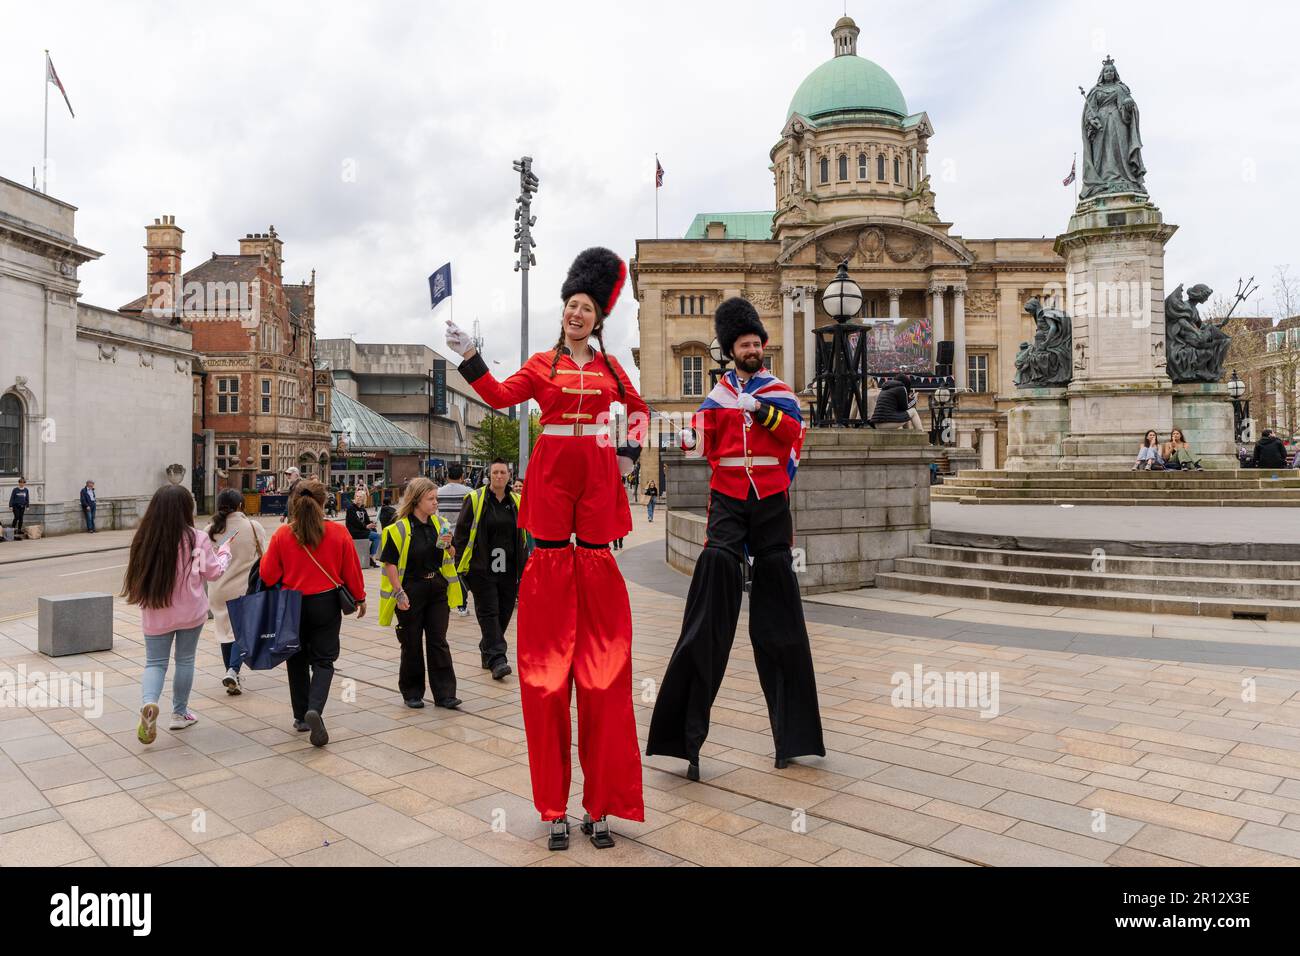 Stilt walkers dressed up in fancy dress military costumes greet people in Kingston upon Hull, UK, on the coronation day of King Charles III Stock Photo